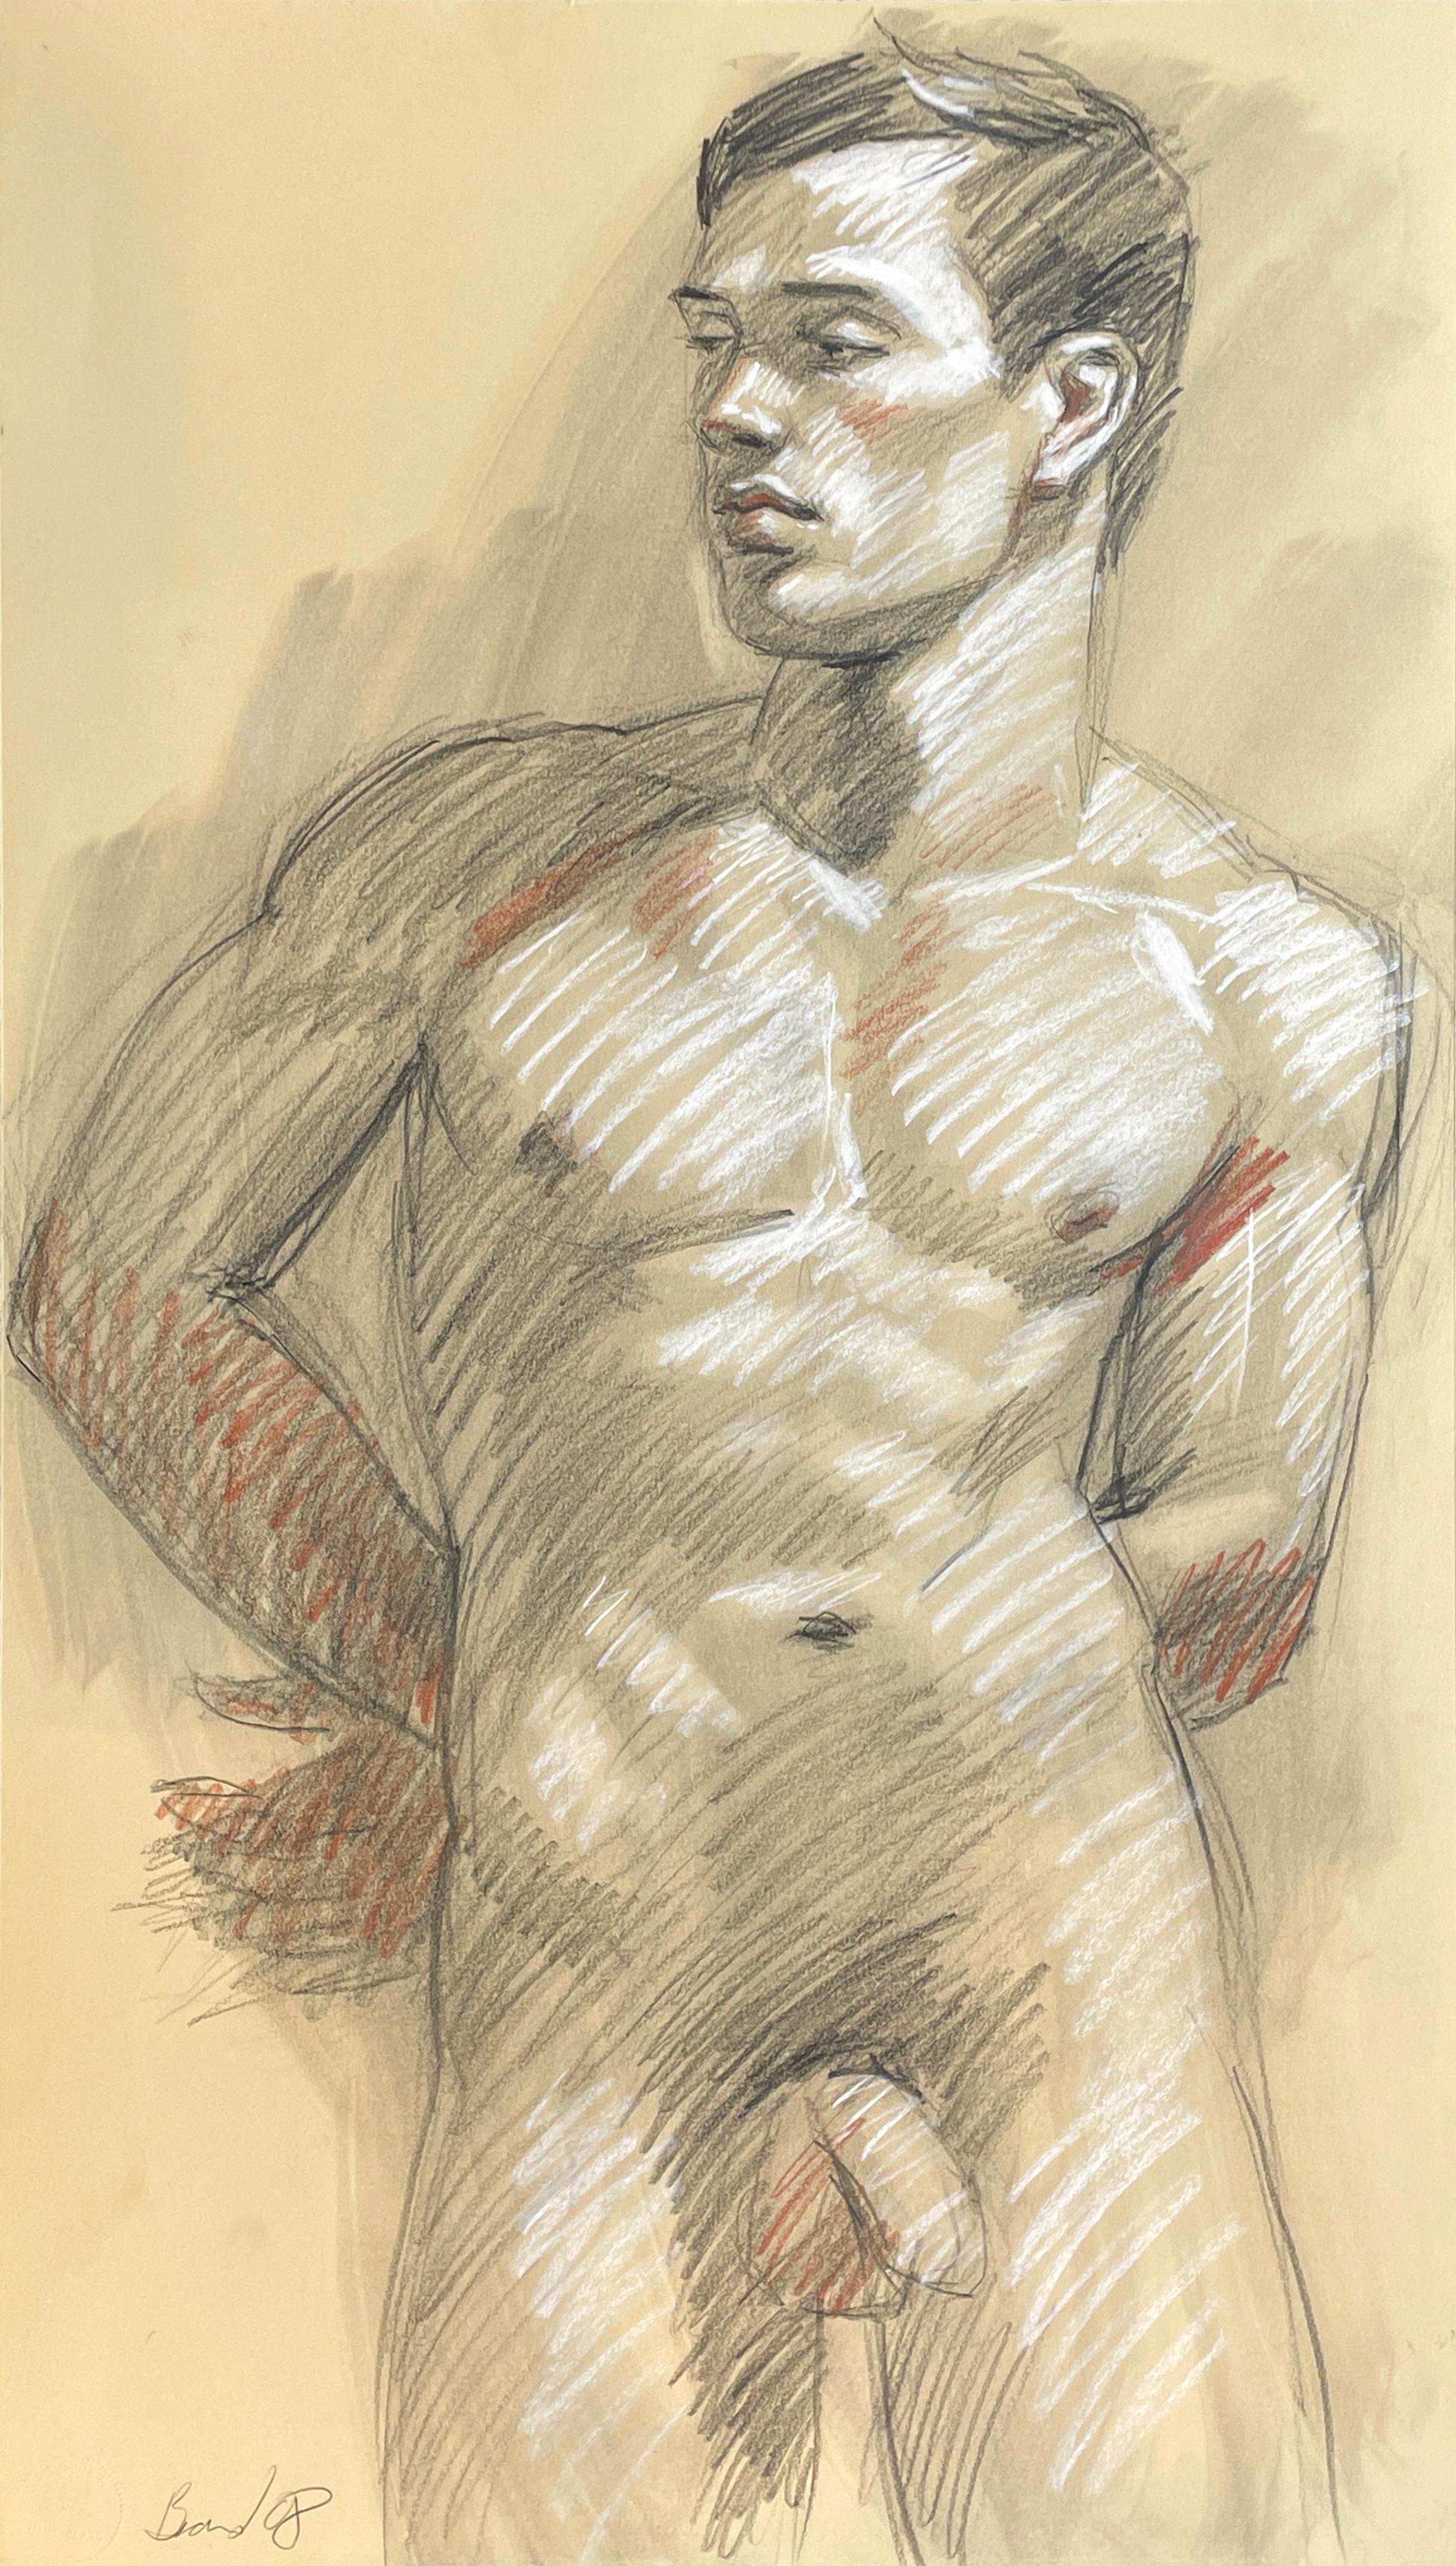 Academic life drawing of male nude with charcoal and graphite by Mark Beard, "MB 023"
graphite, Conte crayon and charcoal on Arches paper
30.5 x 17.5 inches unframed
Signed, lower left

Strong facial features and upper body muscles are evidence of